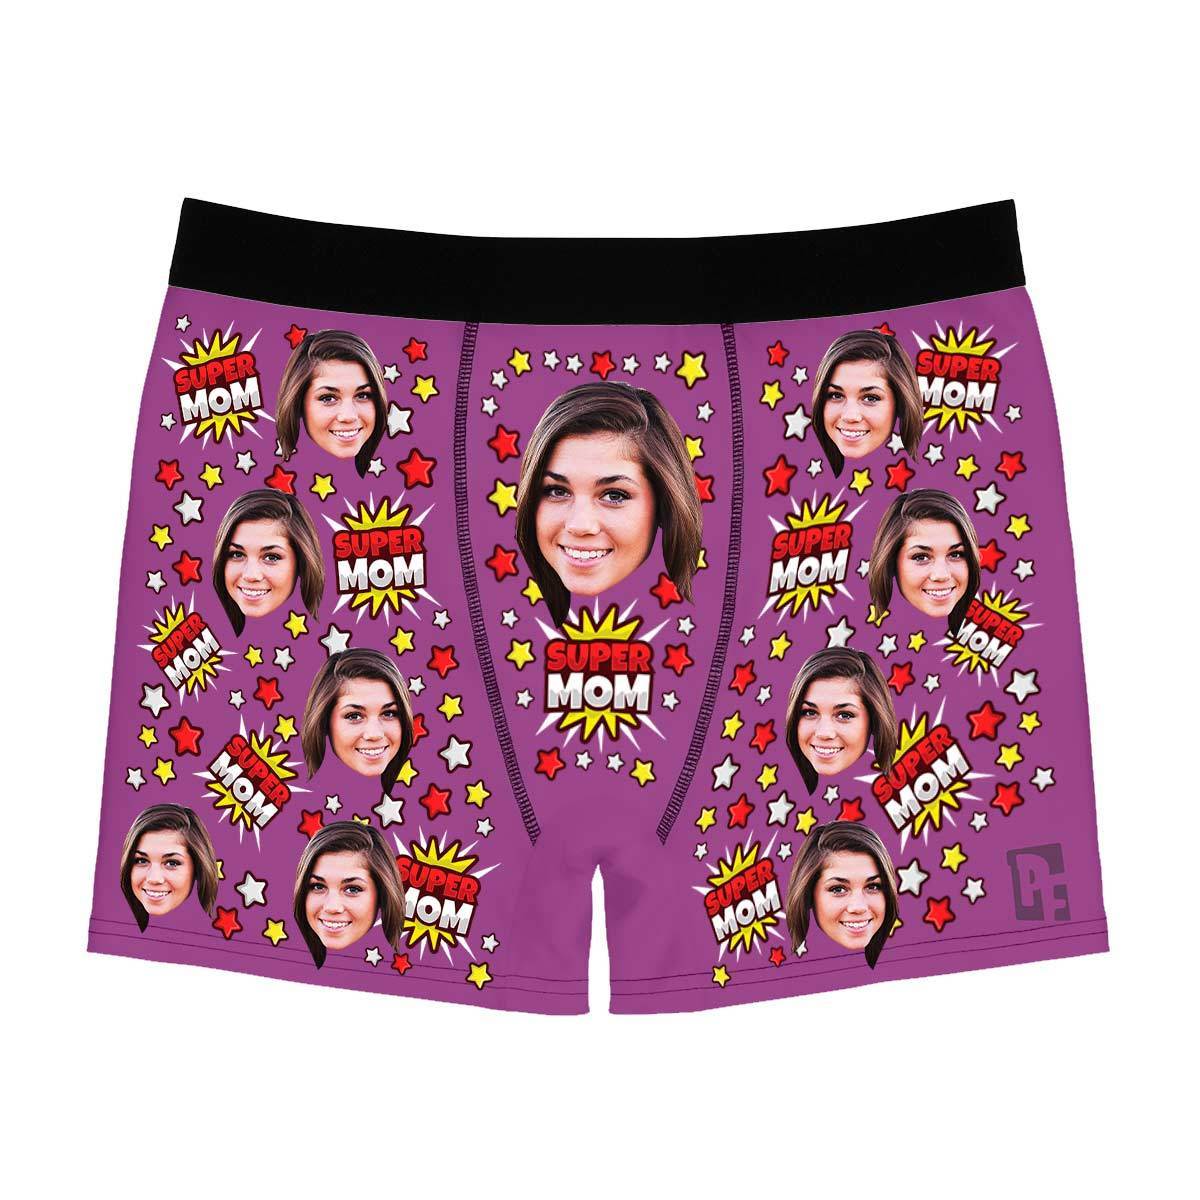 Purple Super mom men's boxer briefs personalized with photo printed on them